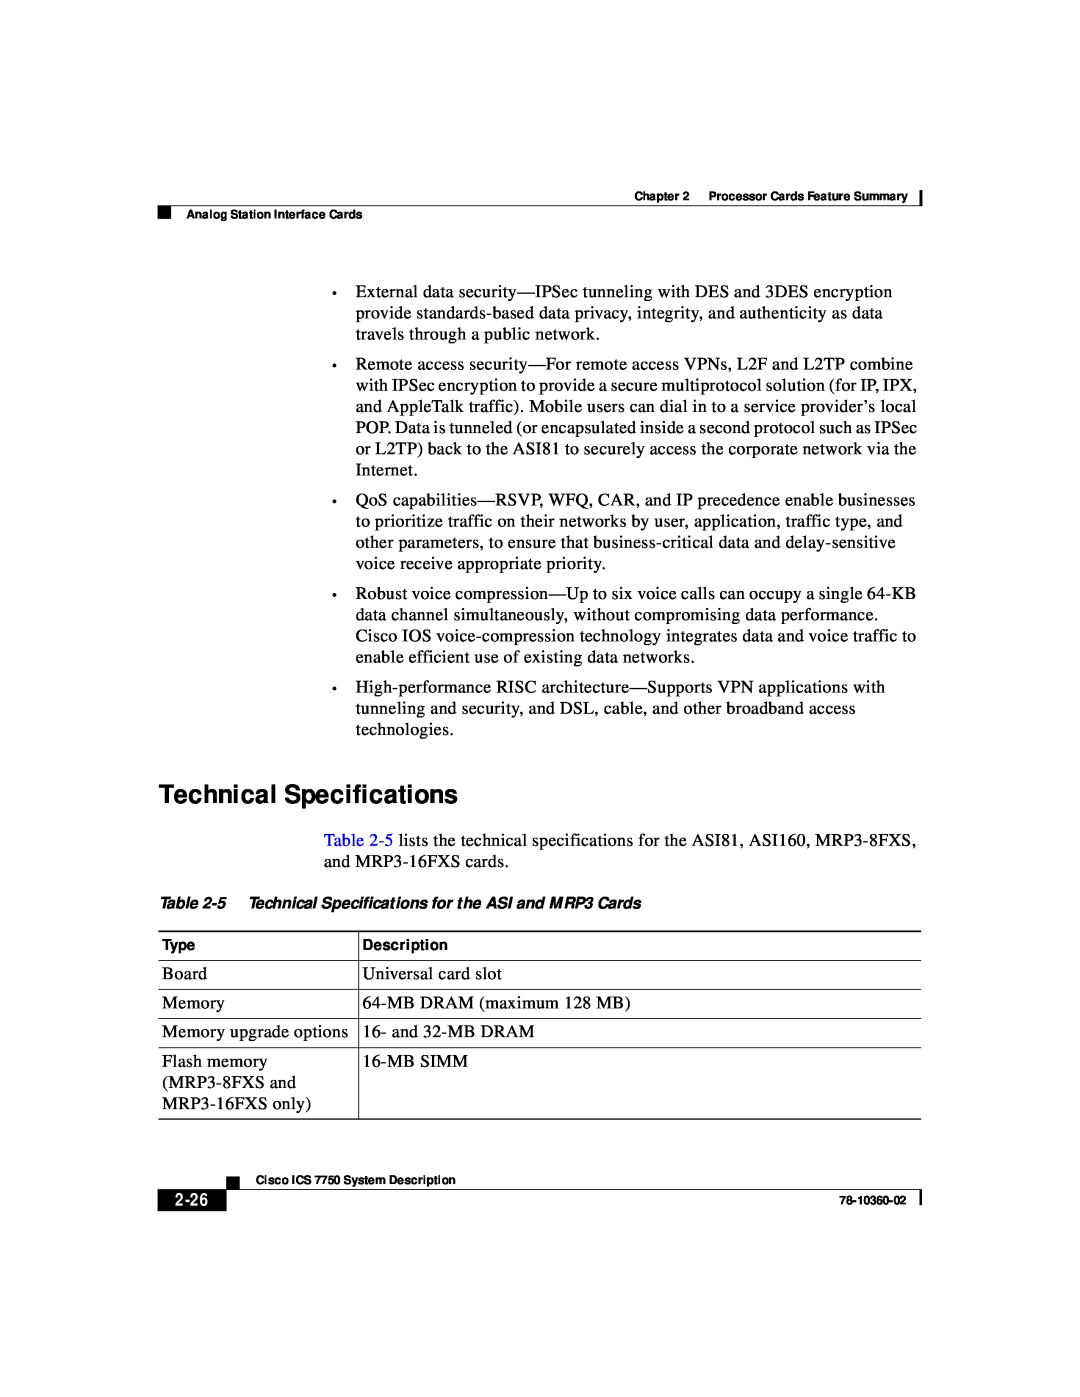 Cisco Systems ICS-7750 manual 2-26, 5 Technical Specifications for the ASI and MRP3 Cards 